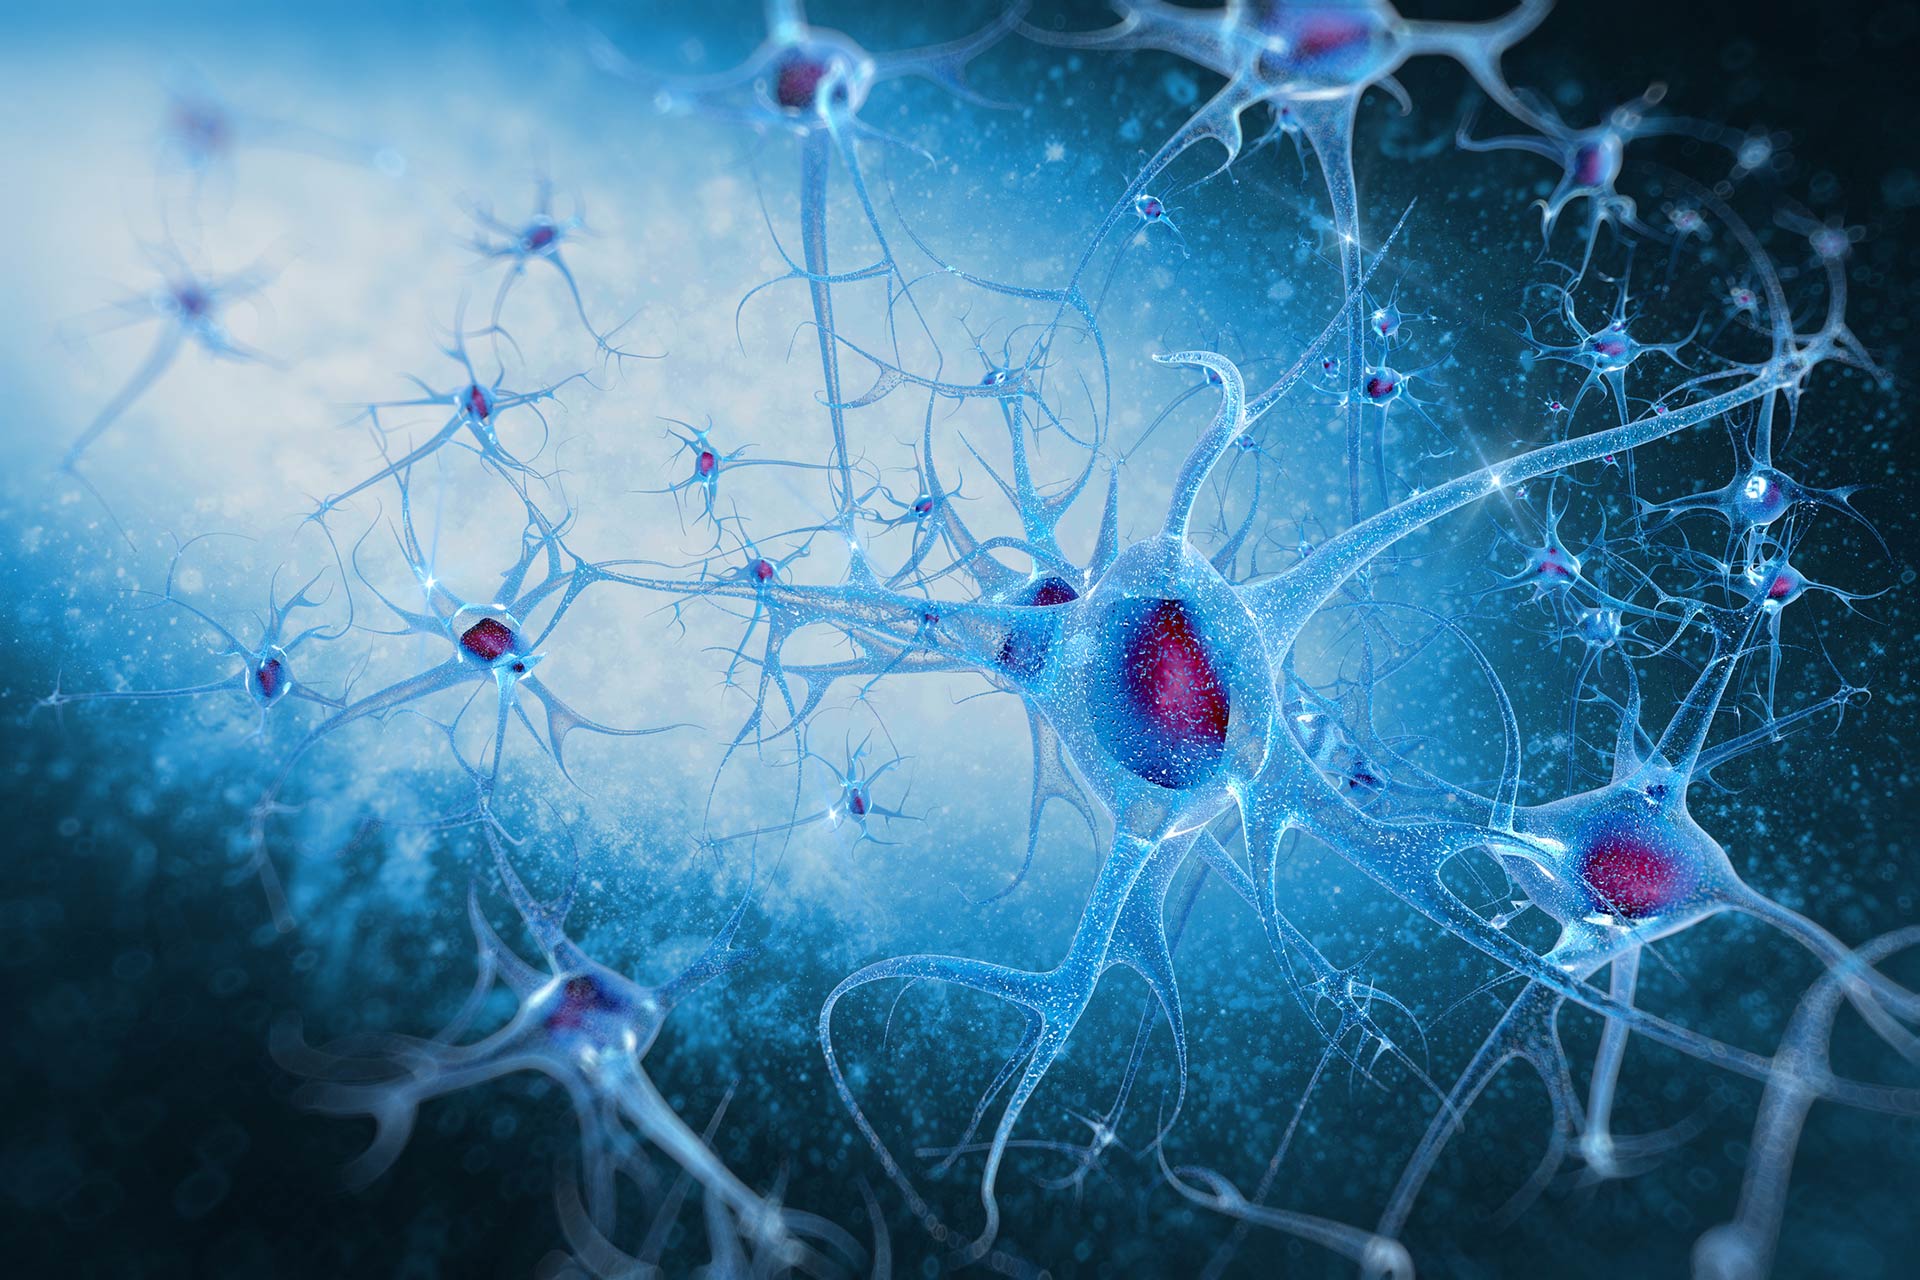 stem cell treatment for neuropathy